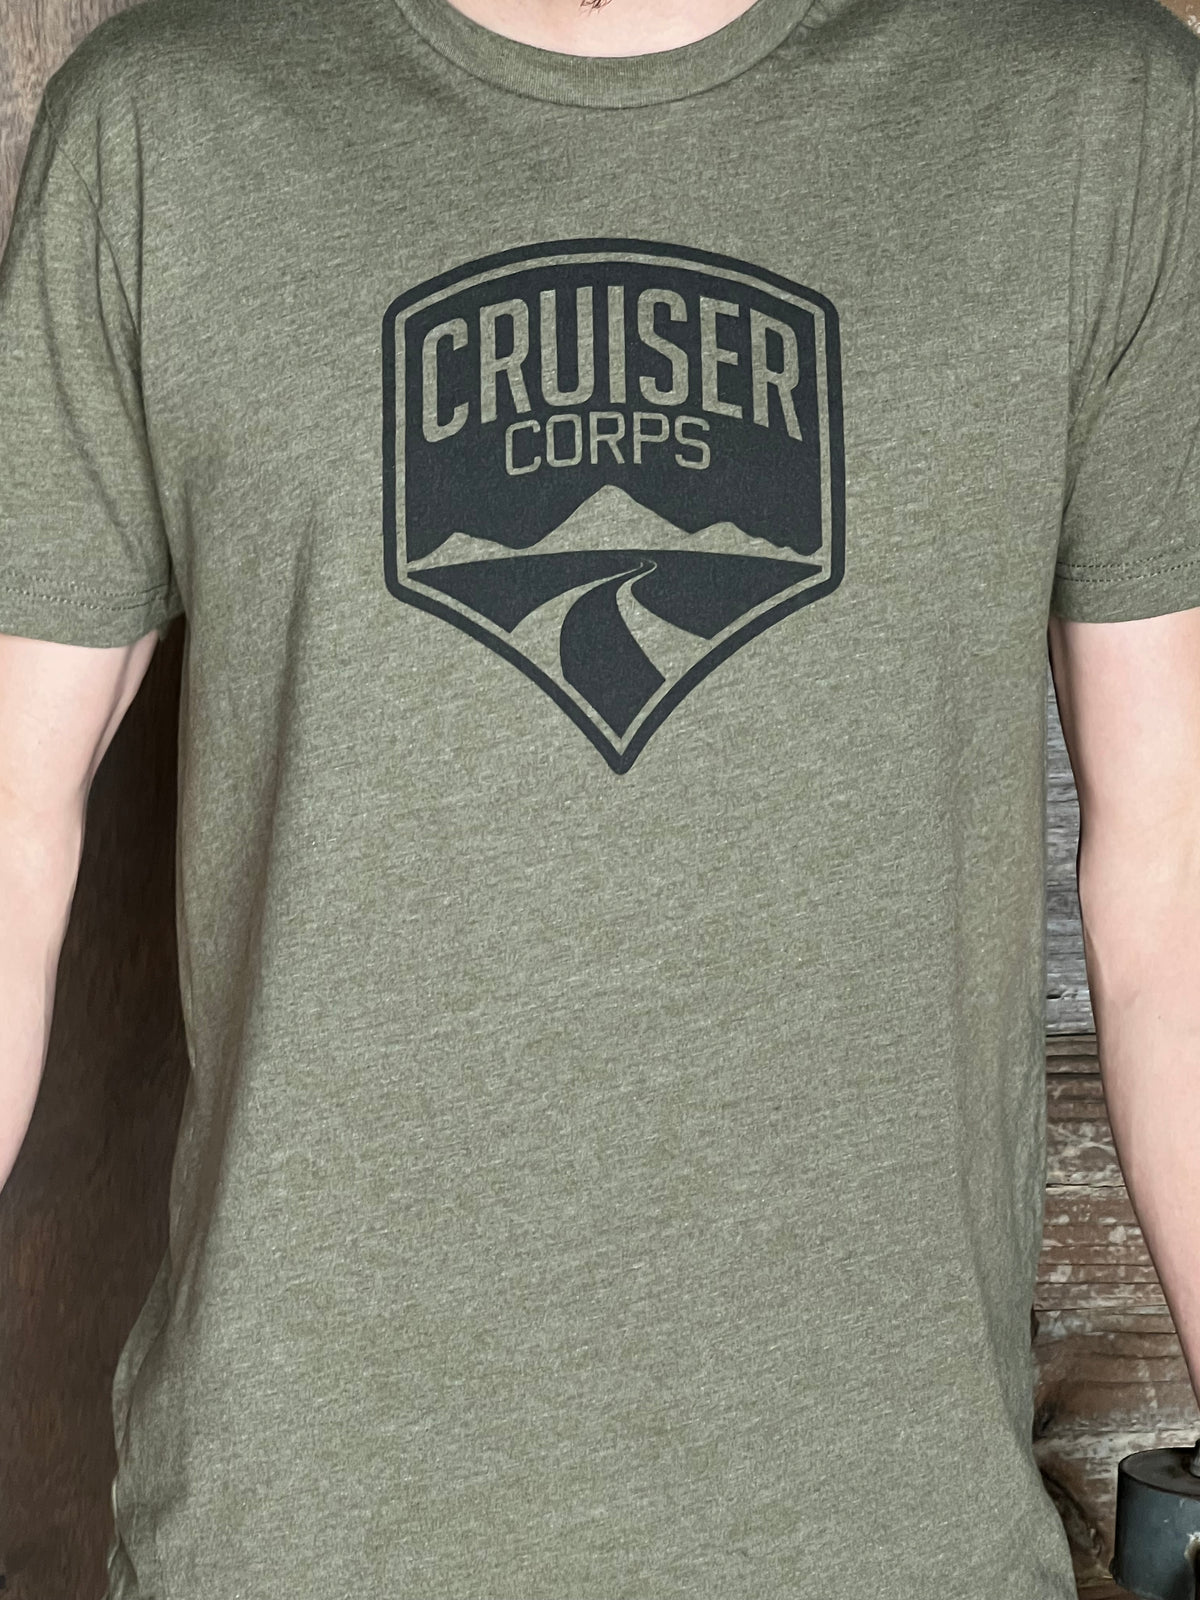 Cruiser Corps T-Shirt - Military Green, With Black Logo - FJ40, FJ45, FJ55, FJ60, FJ62, FJ80, FJ Cruiser, BJ 1958-2009